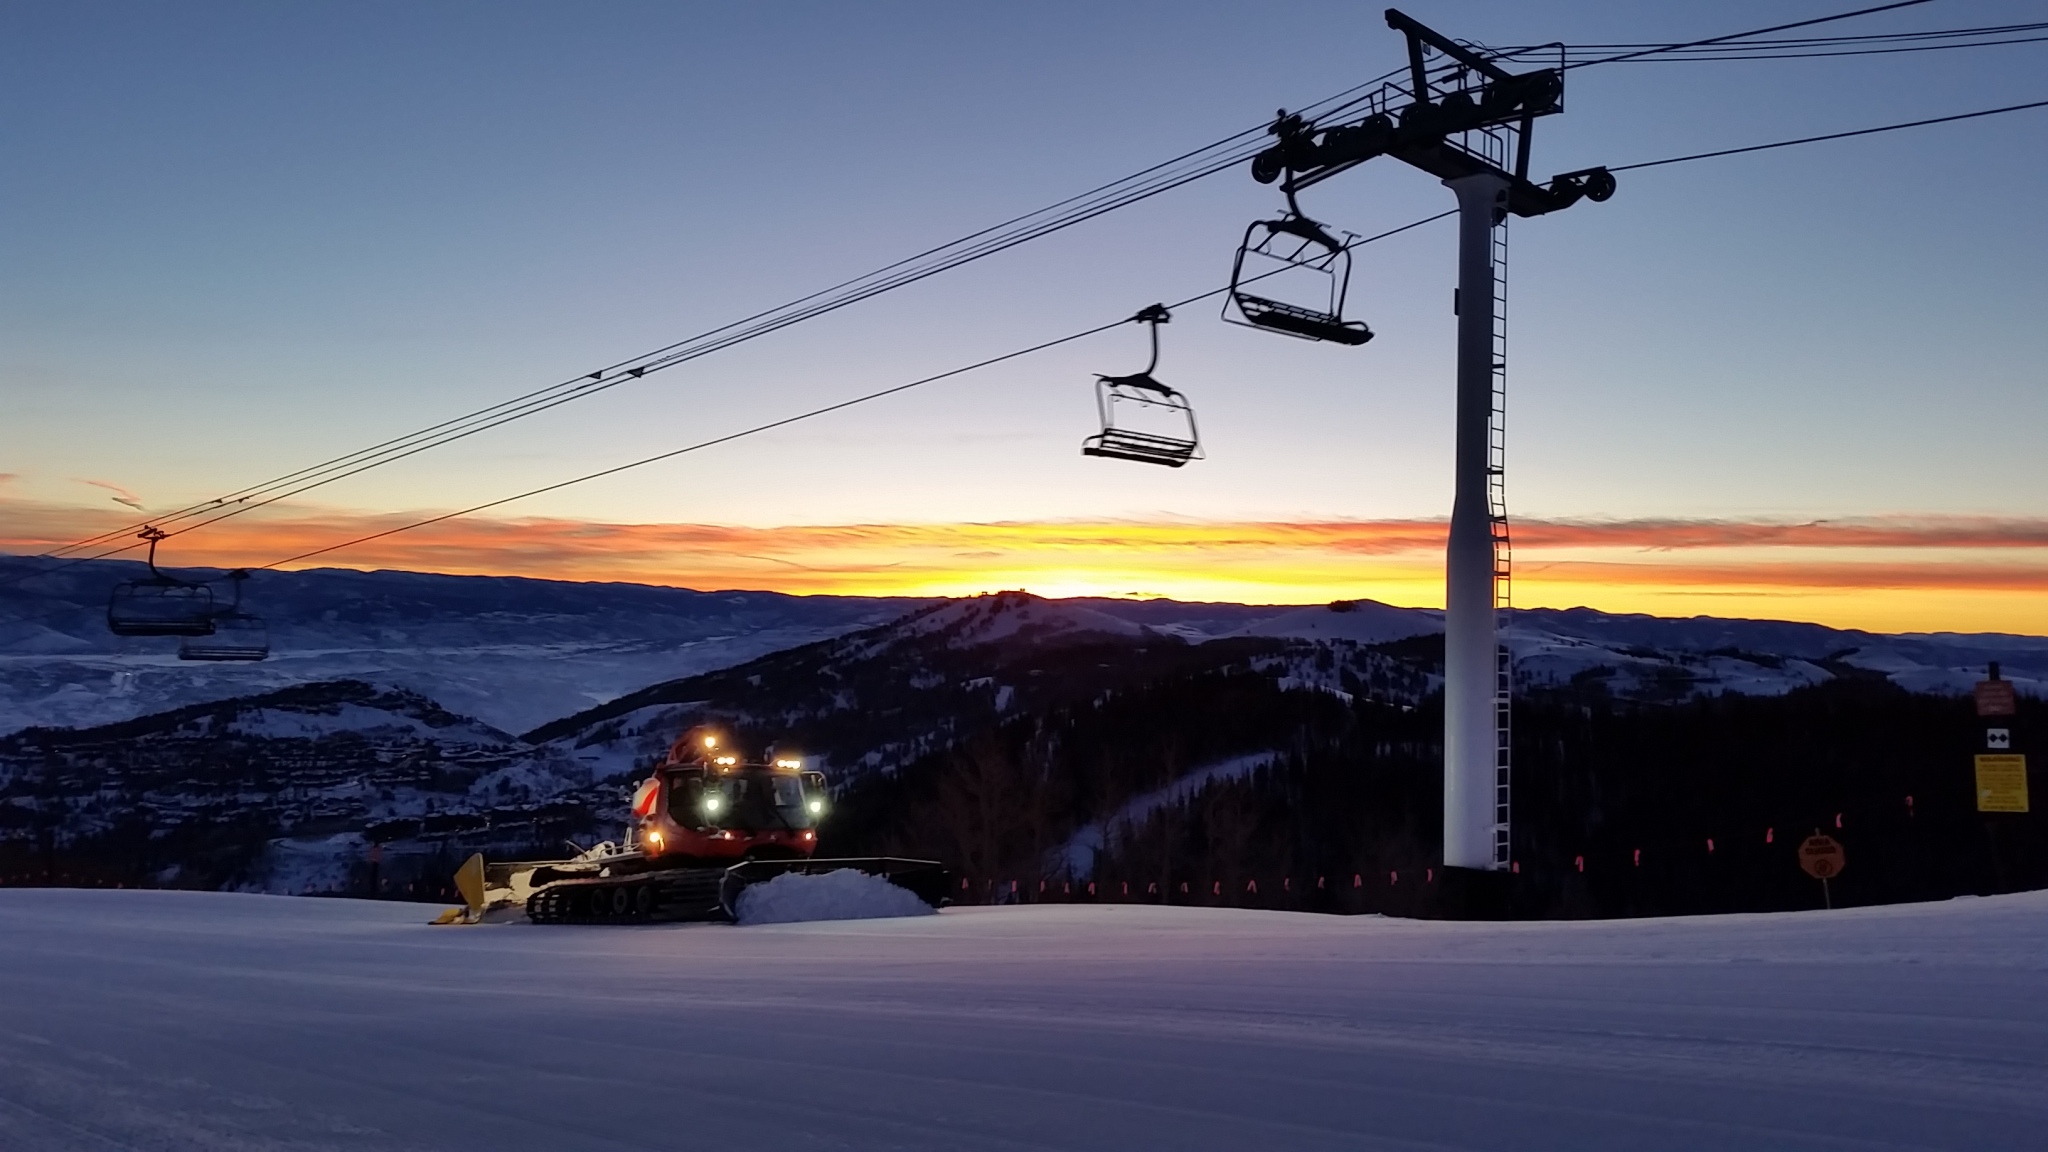 Park City grooming cats. Photo: Vail Resorts. Park City Mountain Announces Plans to Install New Lift for 2019-20 SEASON. 